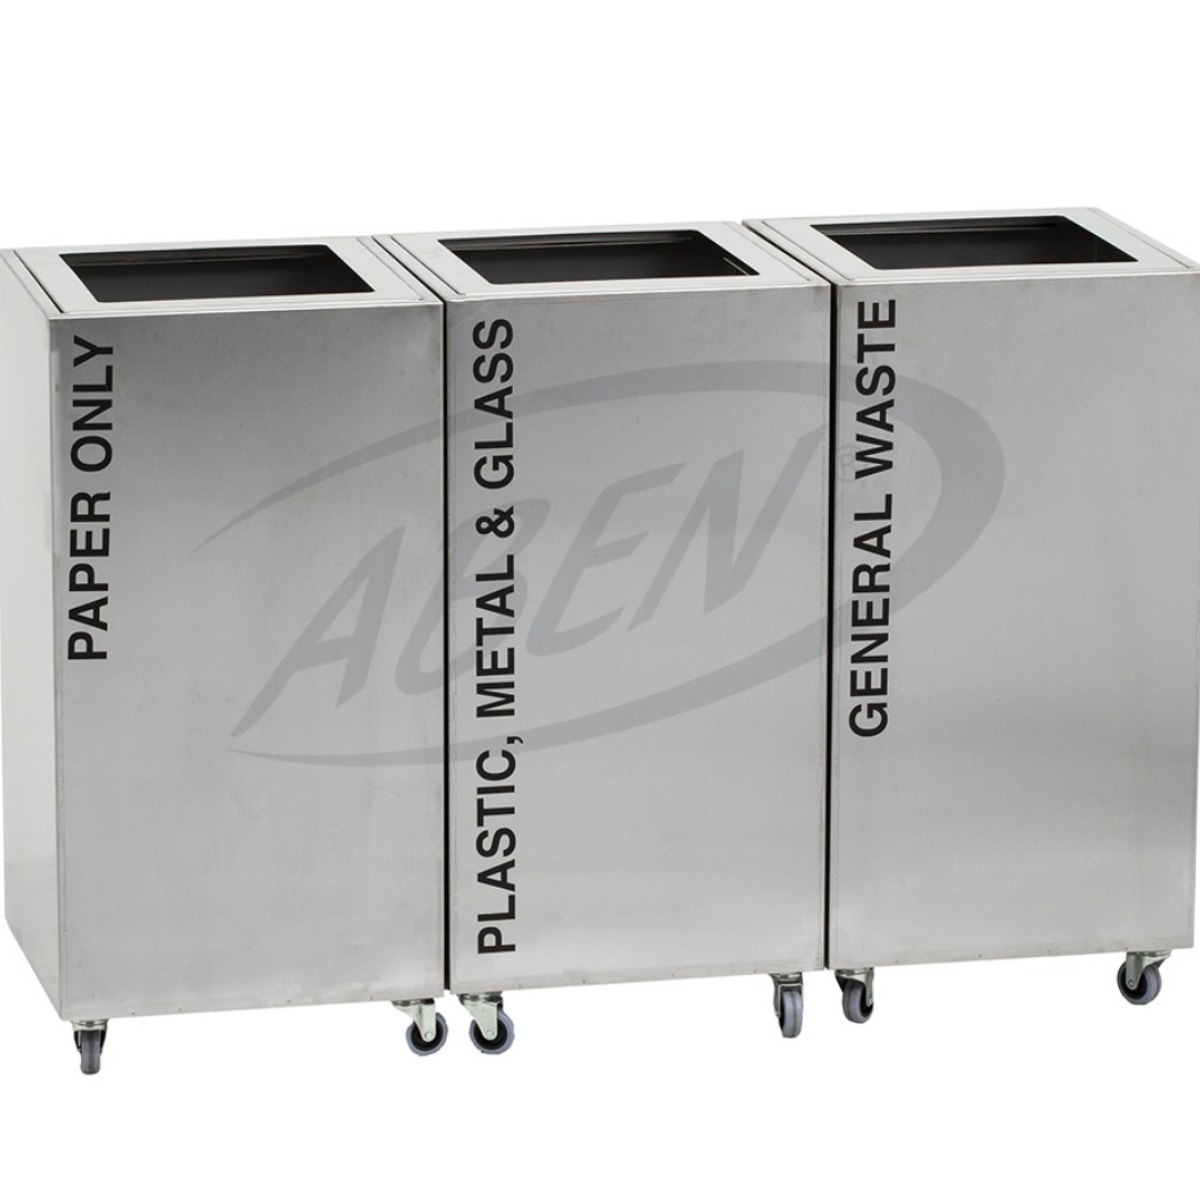 AB-796 3'Part Recycle Bin